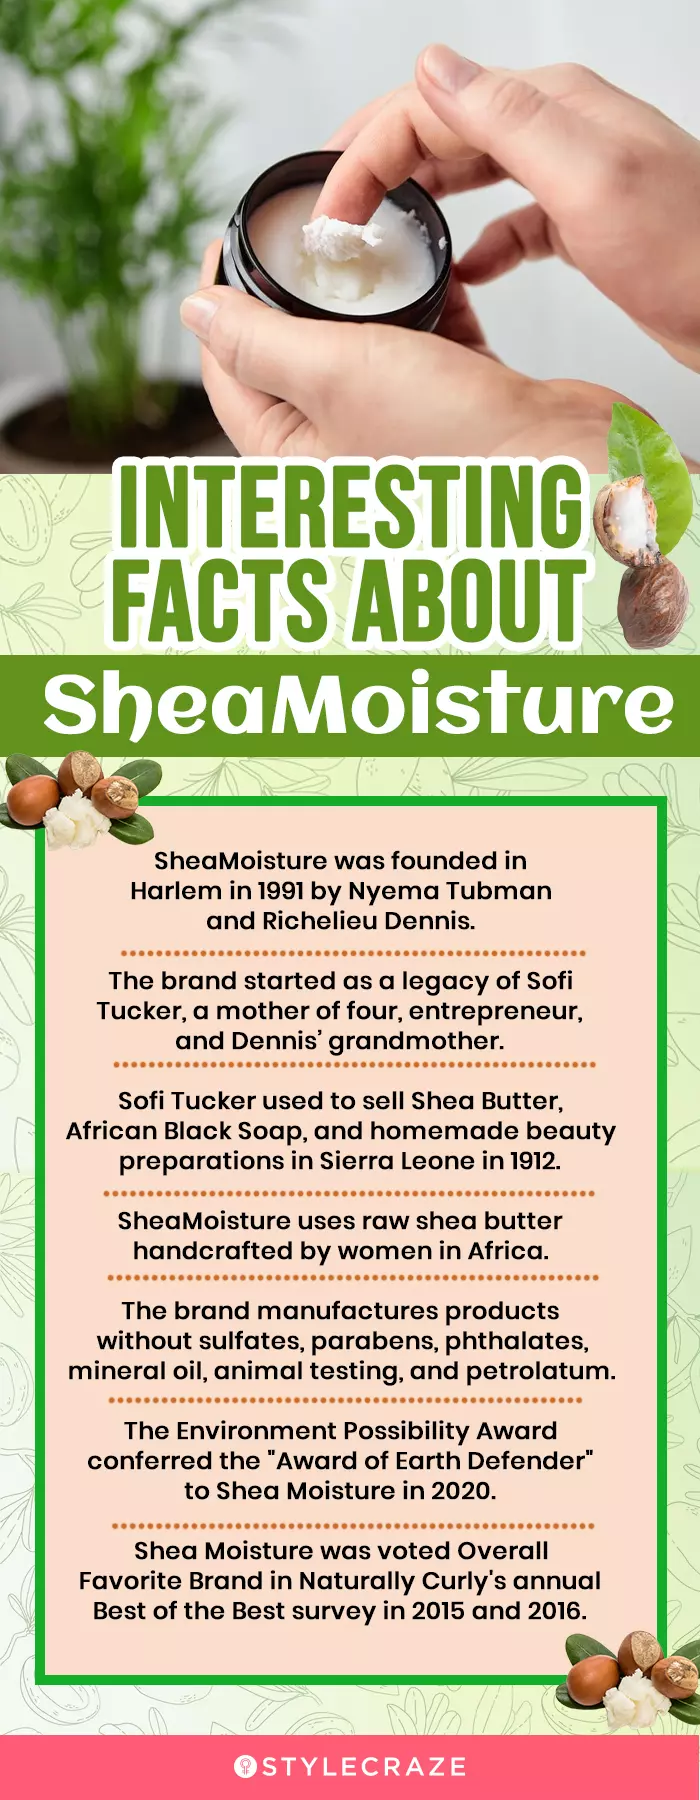 Interesting Facts About SheaMoisture (infographic)